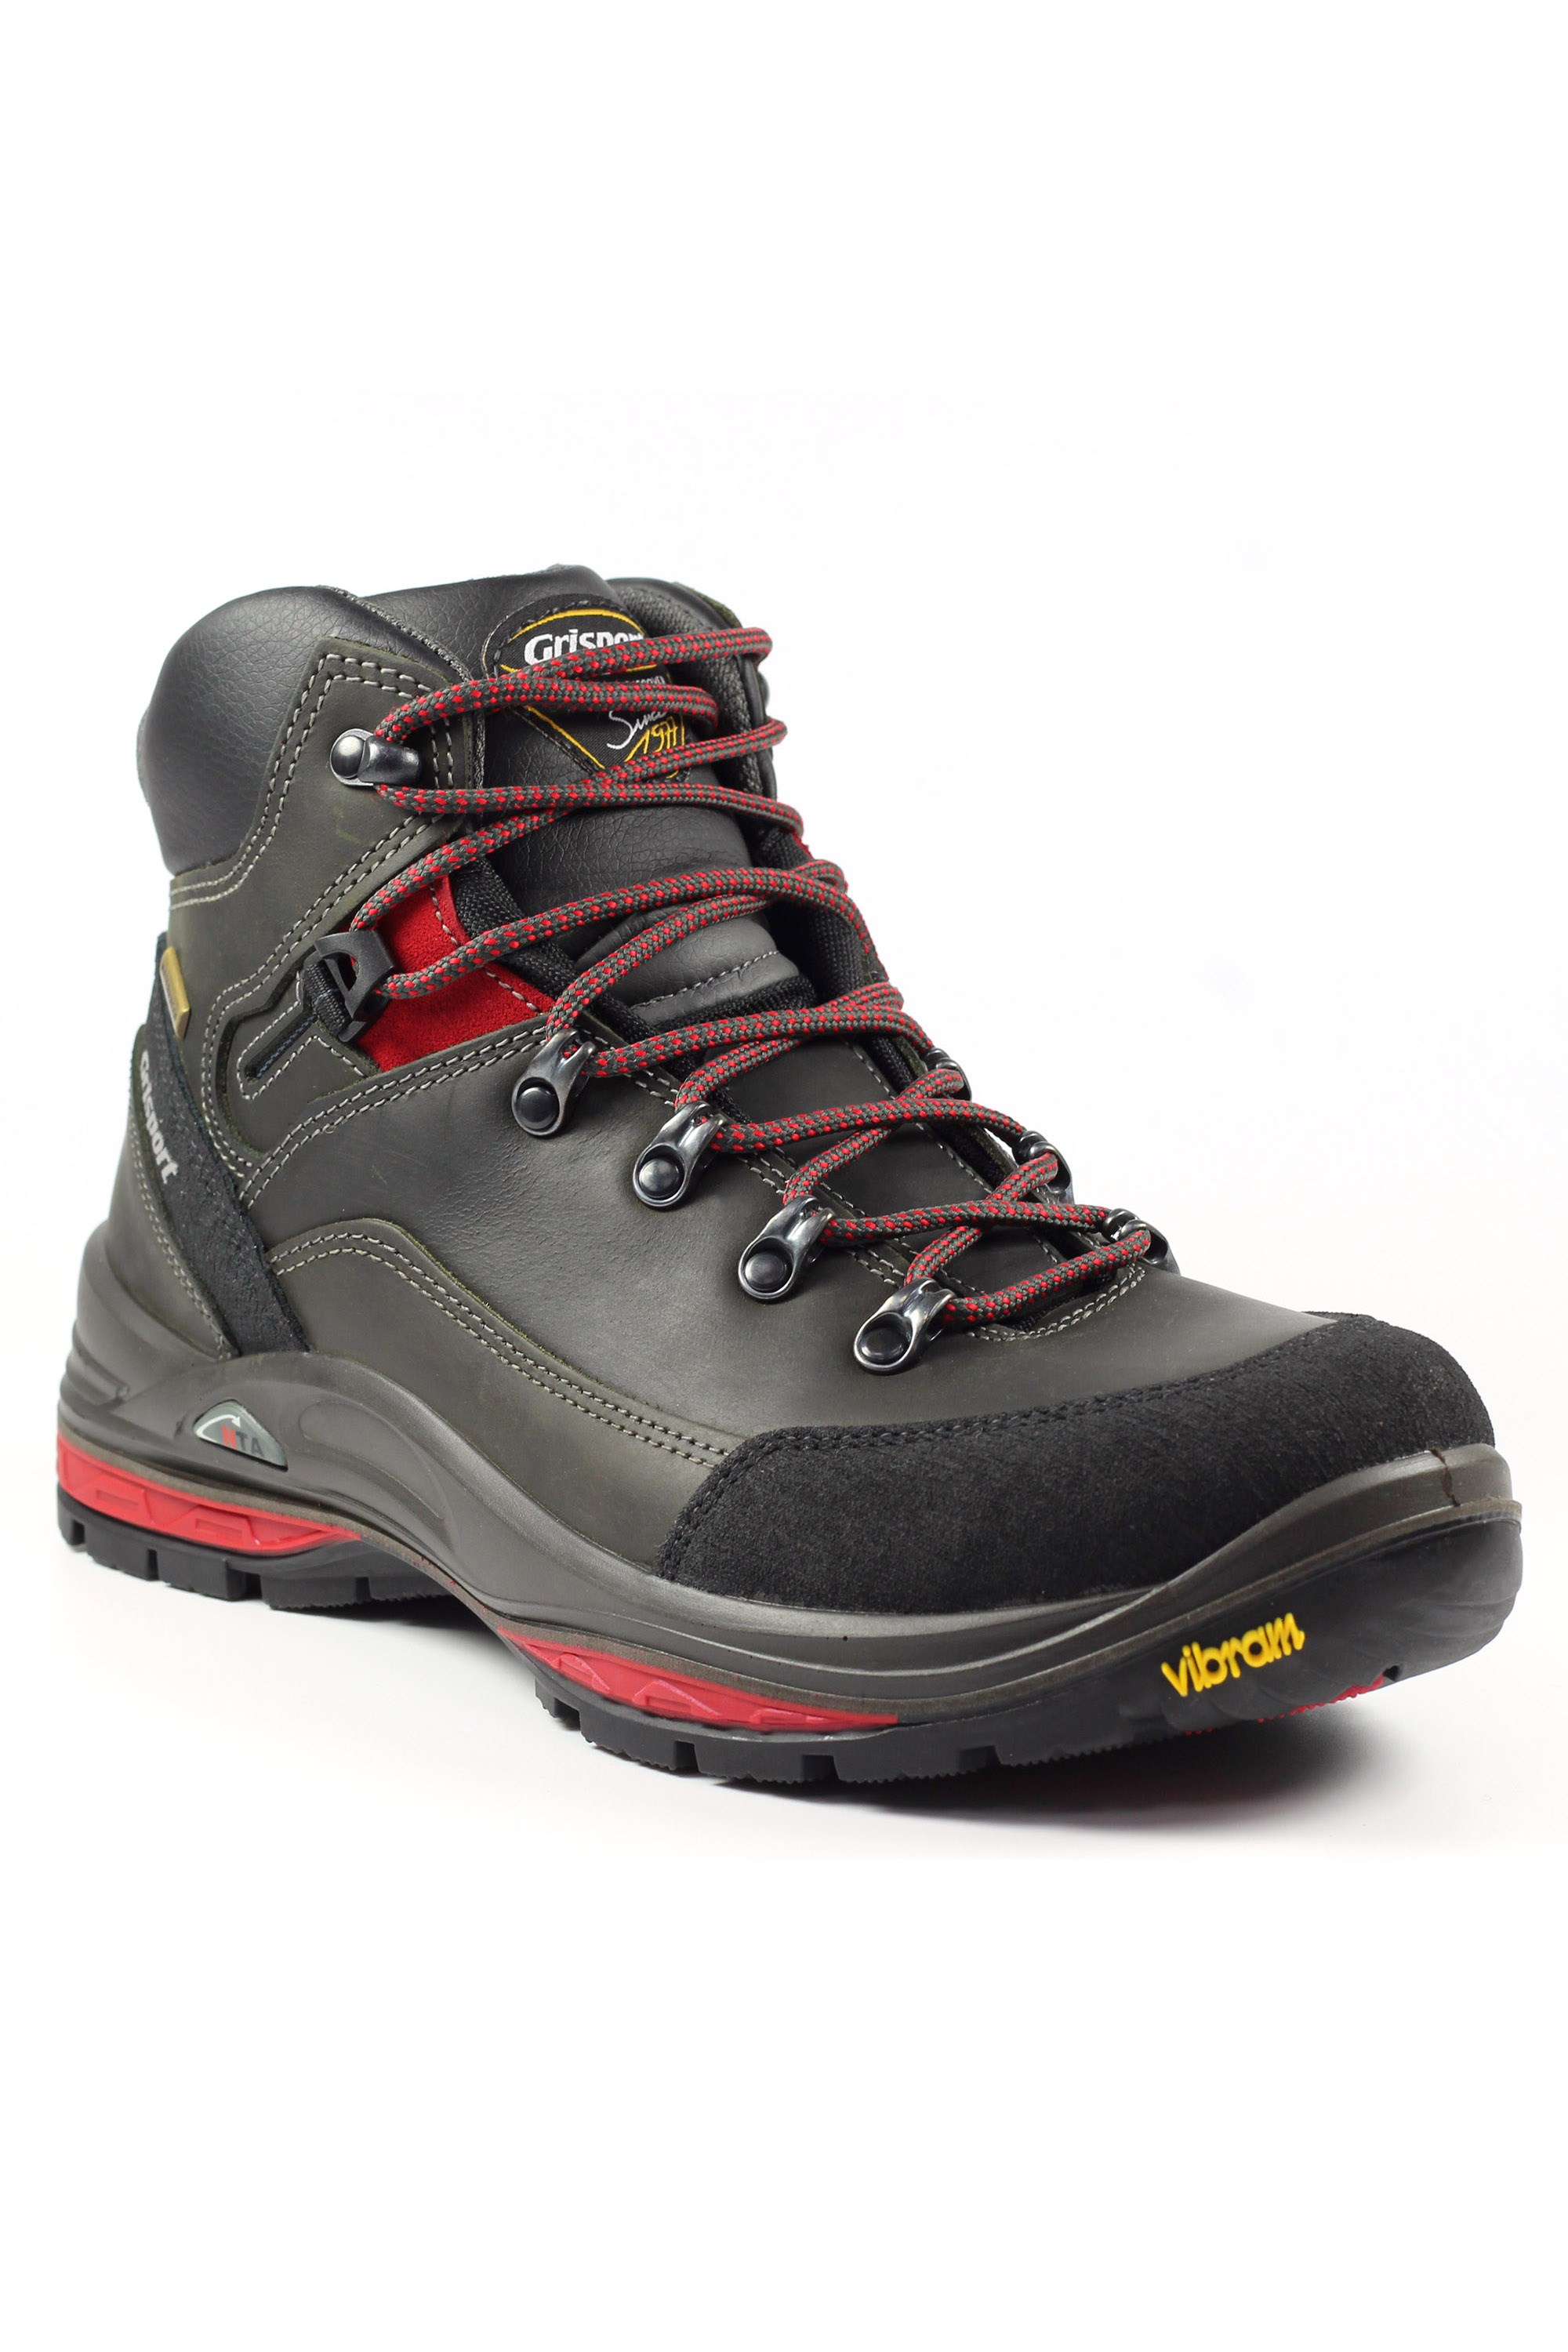 Fortress Mens Waterproof Hiking Boots -